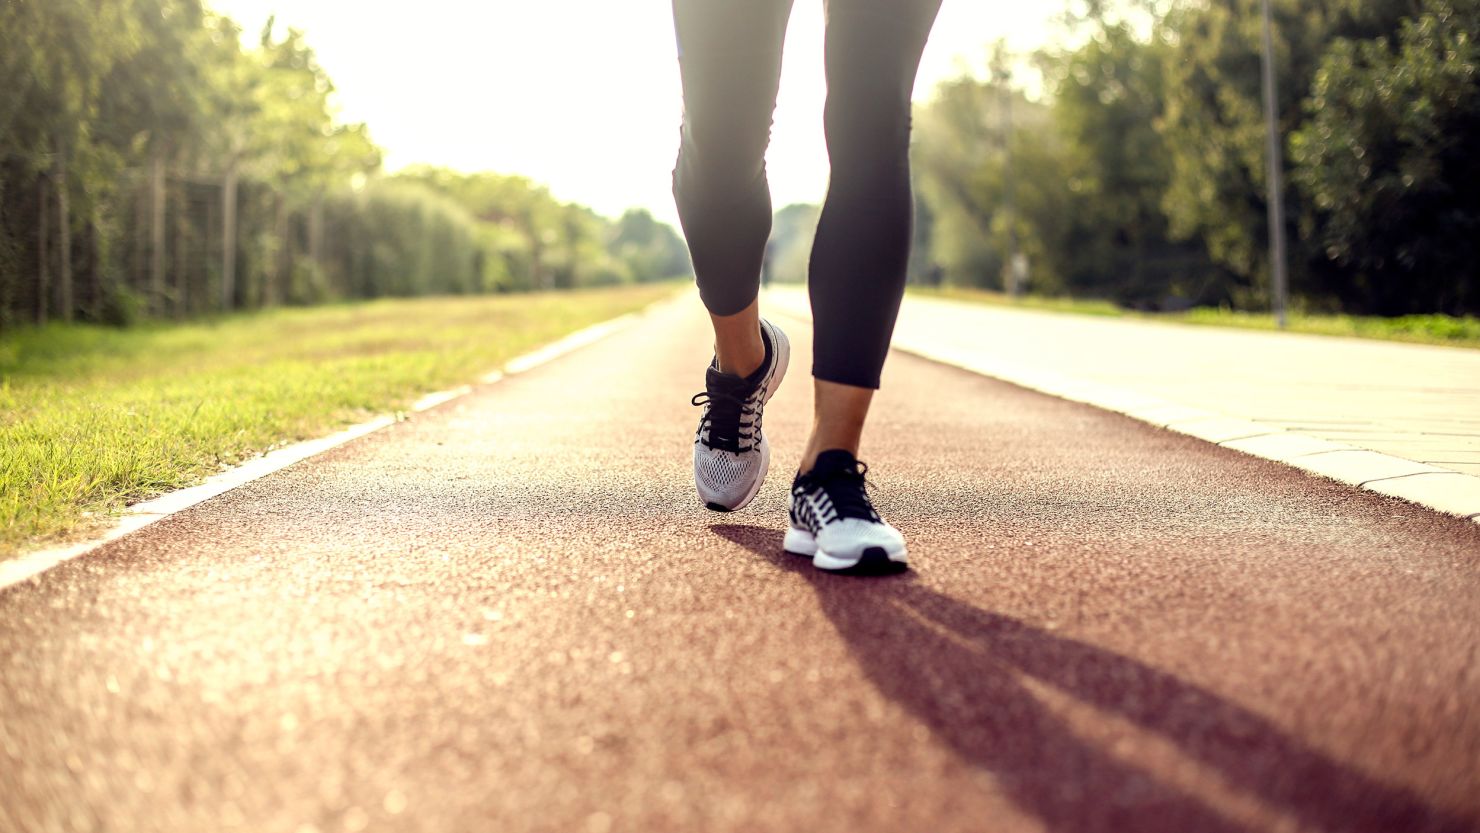 A gait analysis can point out the likelihood of injury, mechanical issues that need addressing, and the time to resume a sports activity after an injury or surgery.